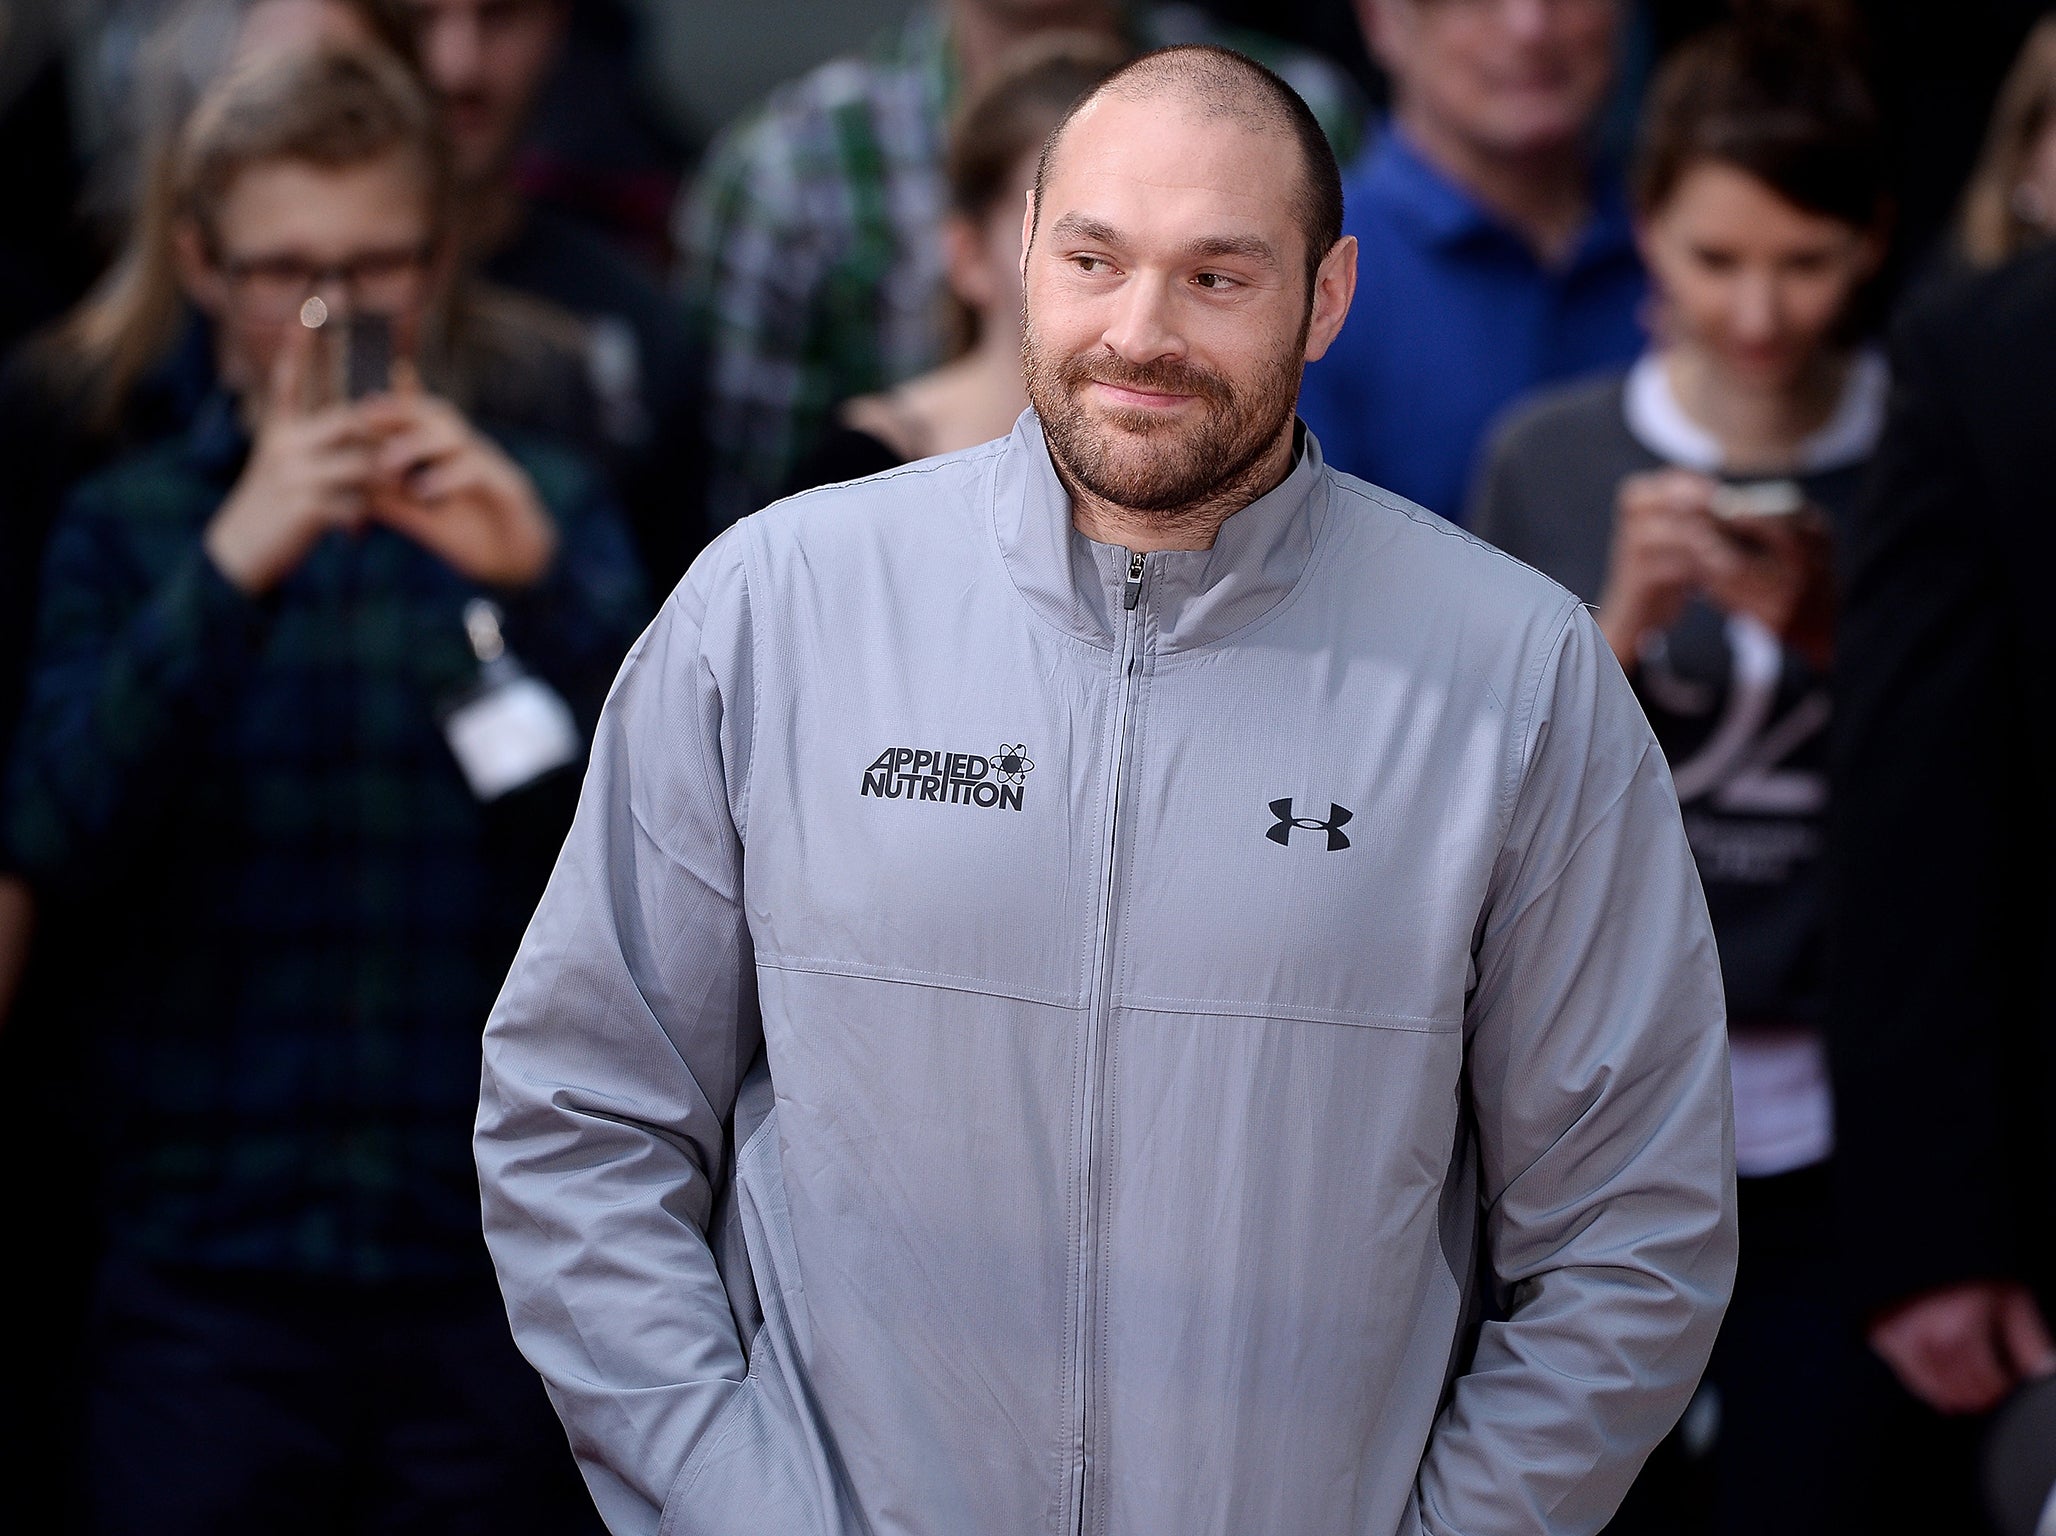 Tyson Fury was handed a backdated two-year ban